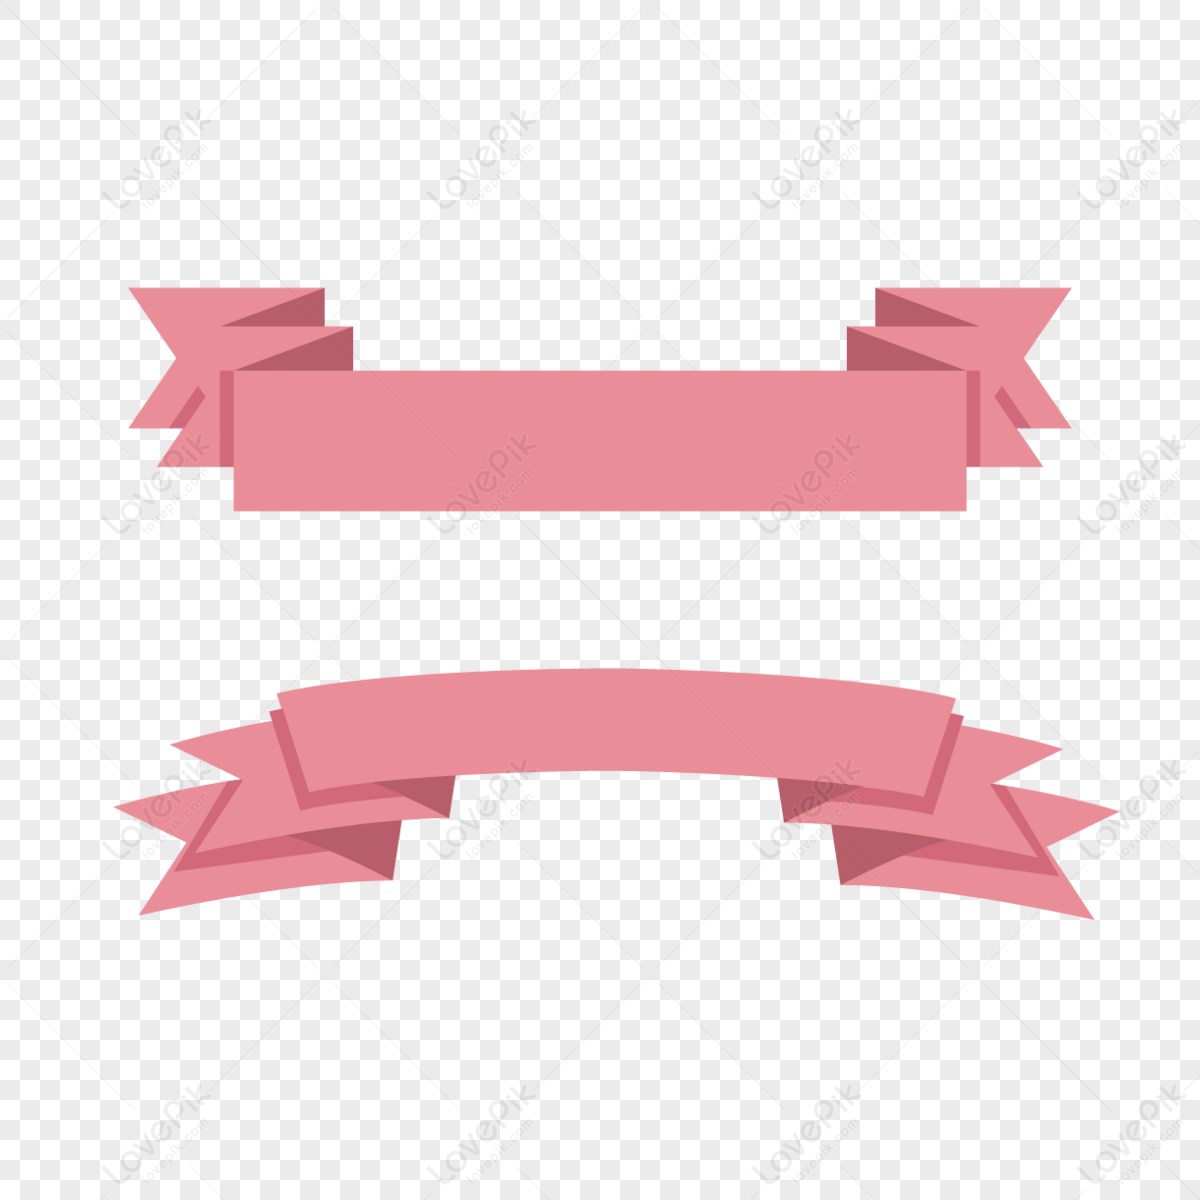 The Blank Pink Label In The Shape Of Ribbon With Subtle Texture Royalty  Free SVG, Cliparts, Vectors, and Stock Illustration. Image 21529621.